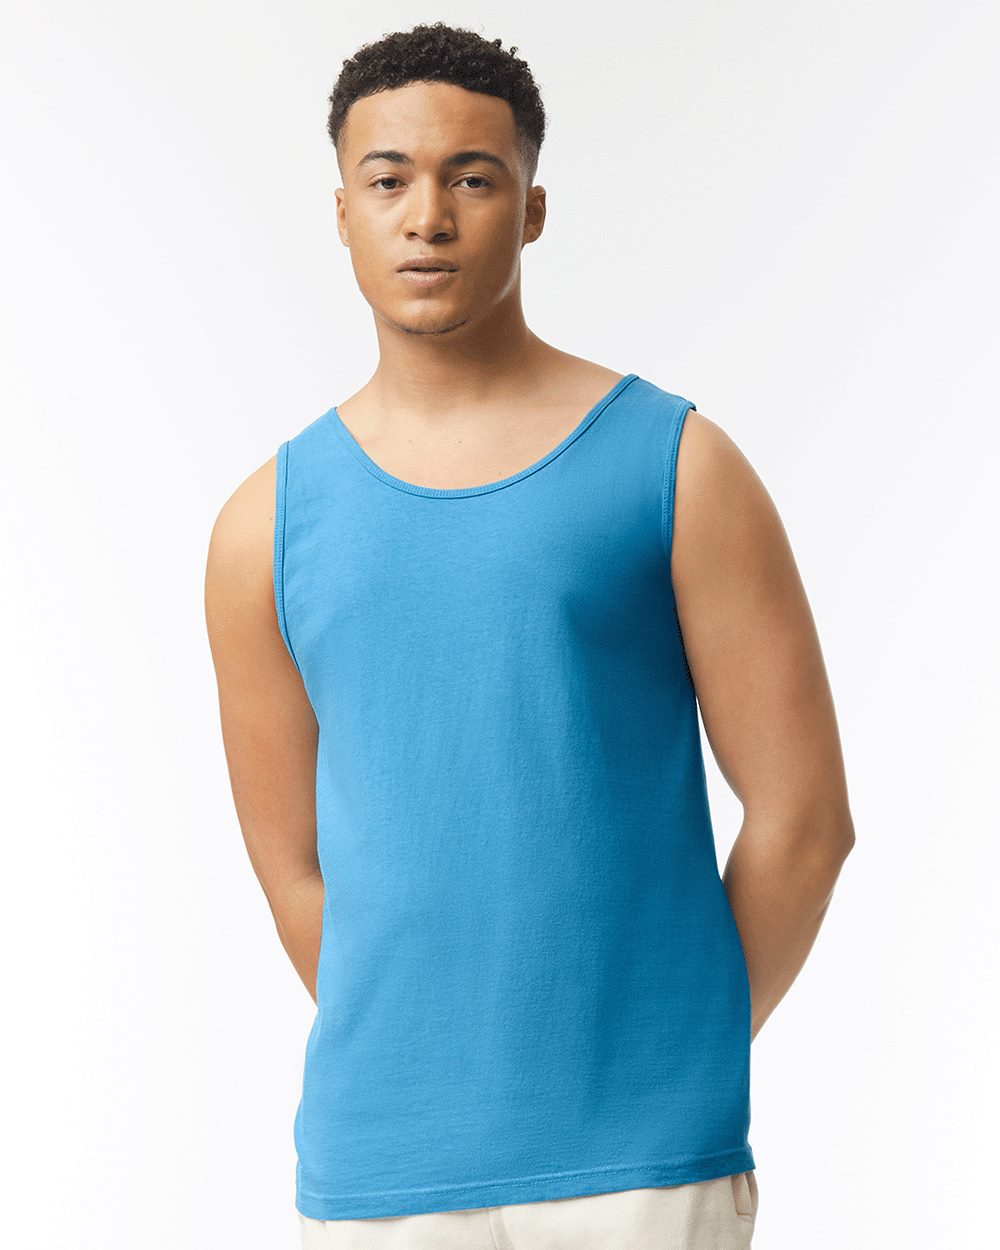 Tank Top Guide - Mens Tank Top Design Variations : Mens Muscle Workout  Clothing - Tank Top